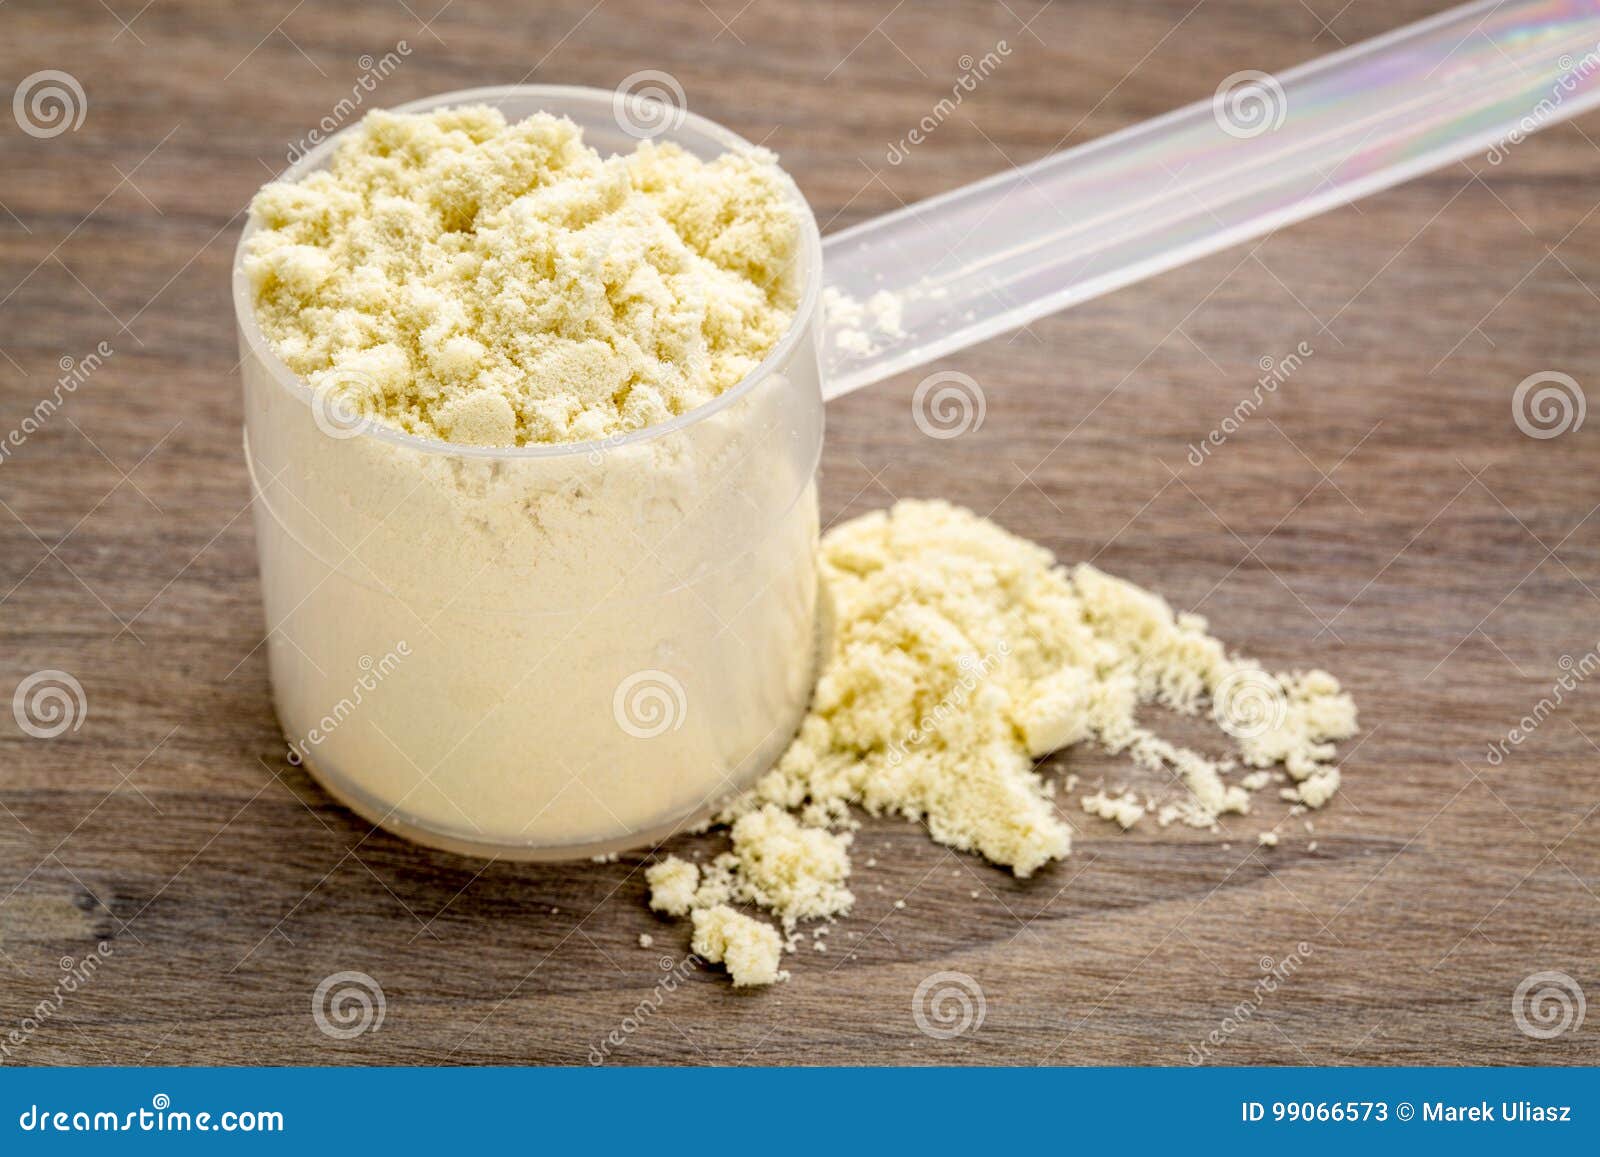 Measuring Scoop Of Whey Protein Powder Stock Image Image Of